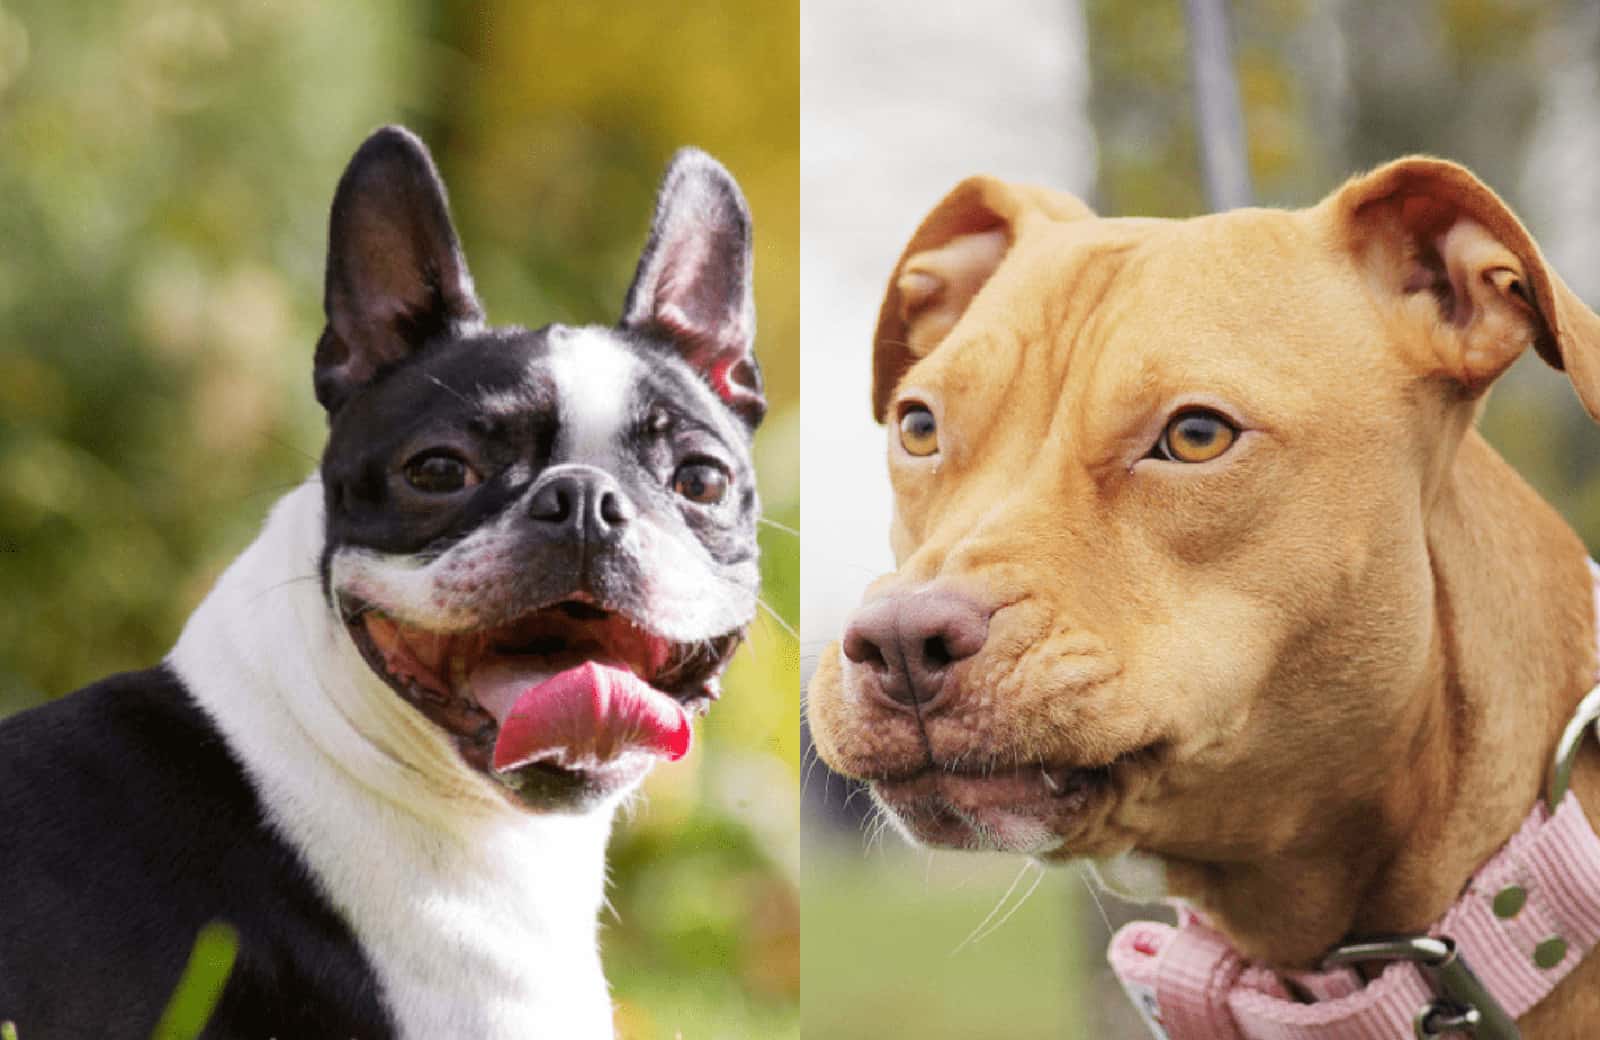 What Makes The Boston Terrier Pitbull Mix So Special?